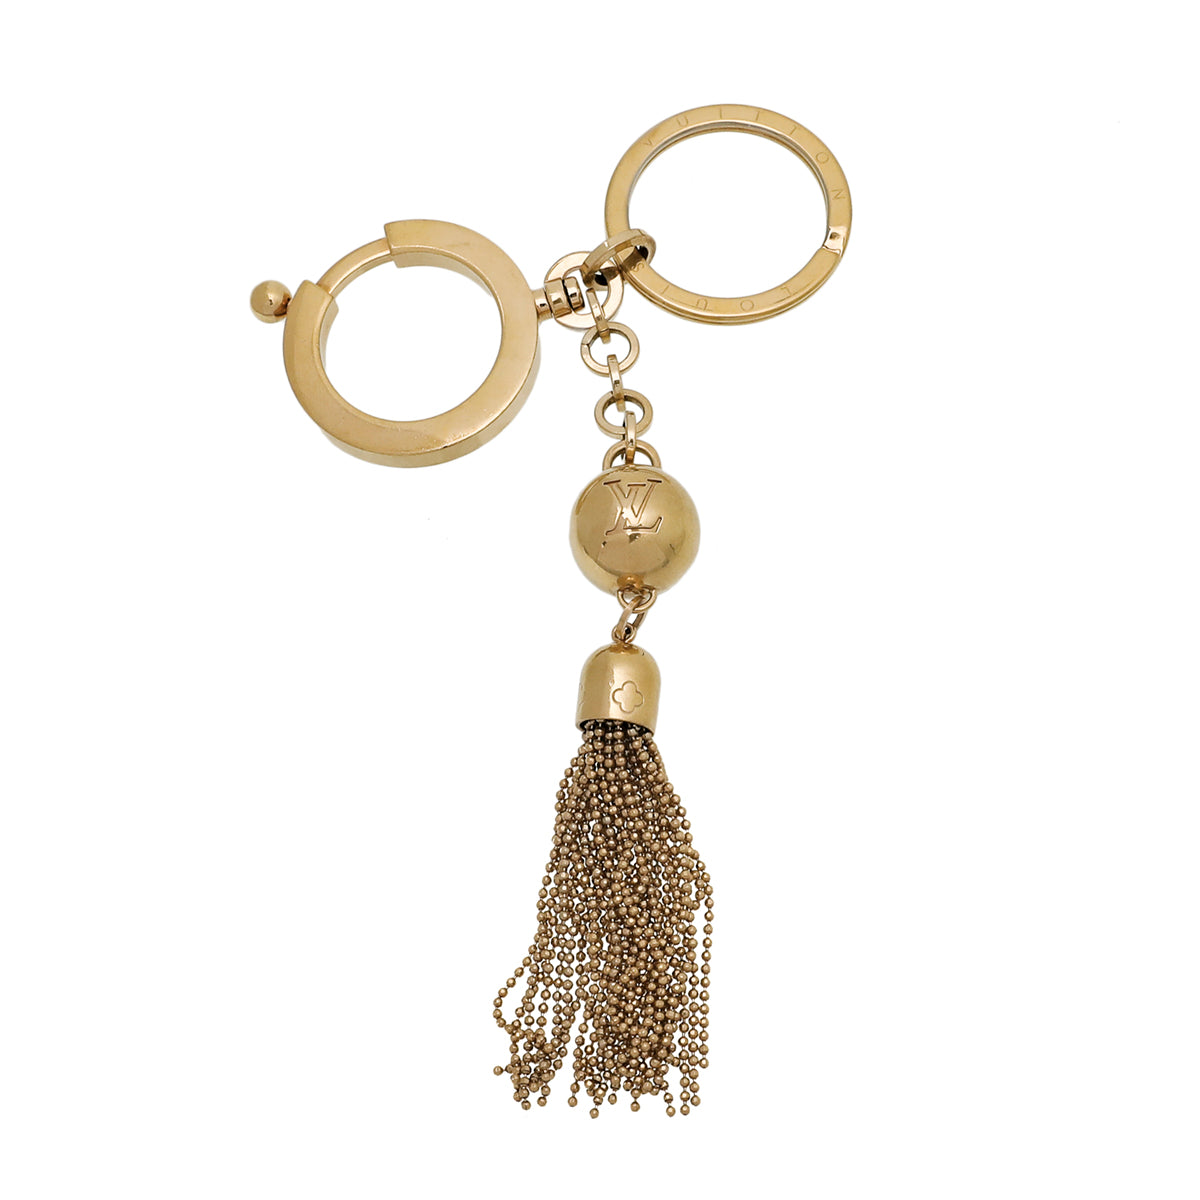 Louis Vuitton x Fornasetti Keychain Gold in Gold Metal with Gold